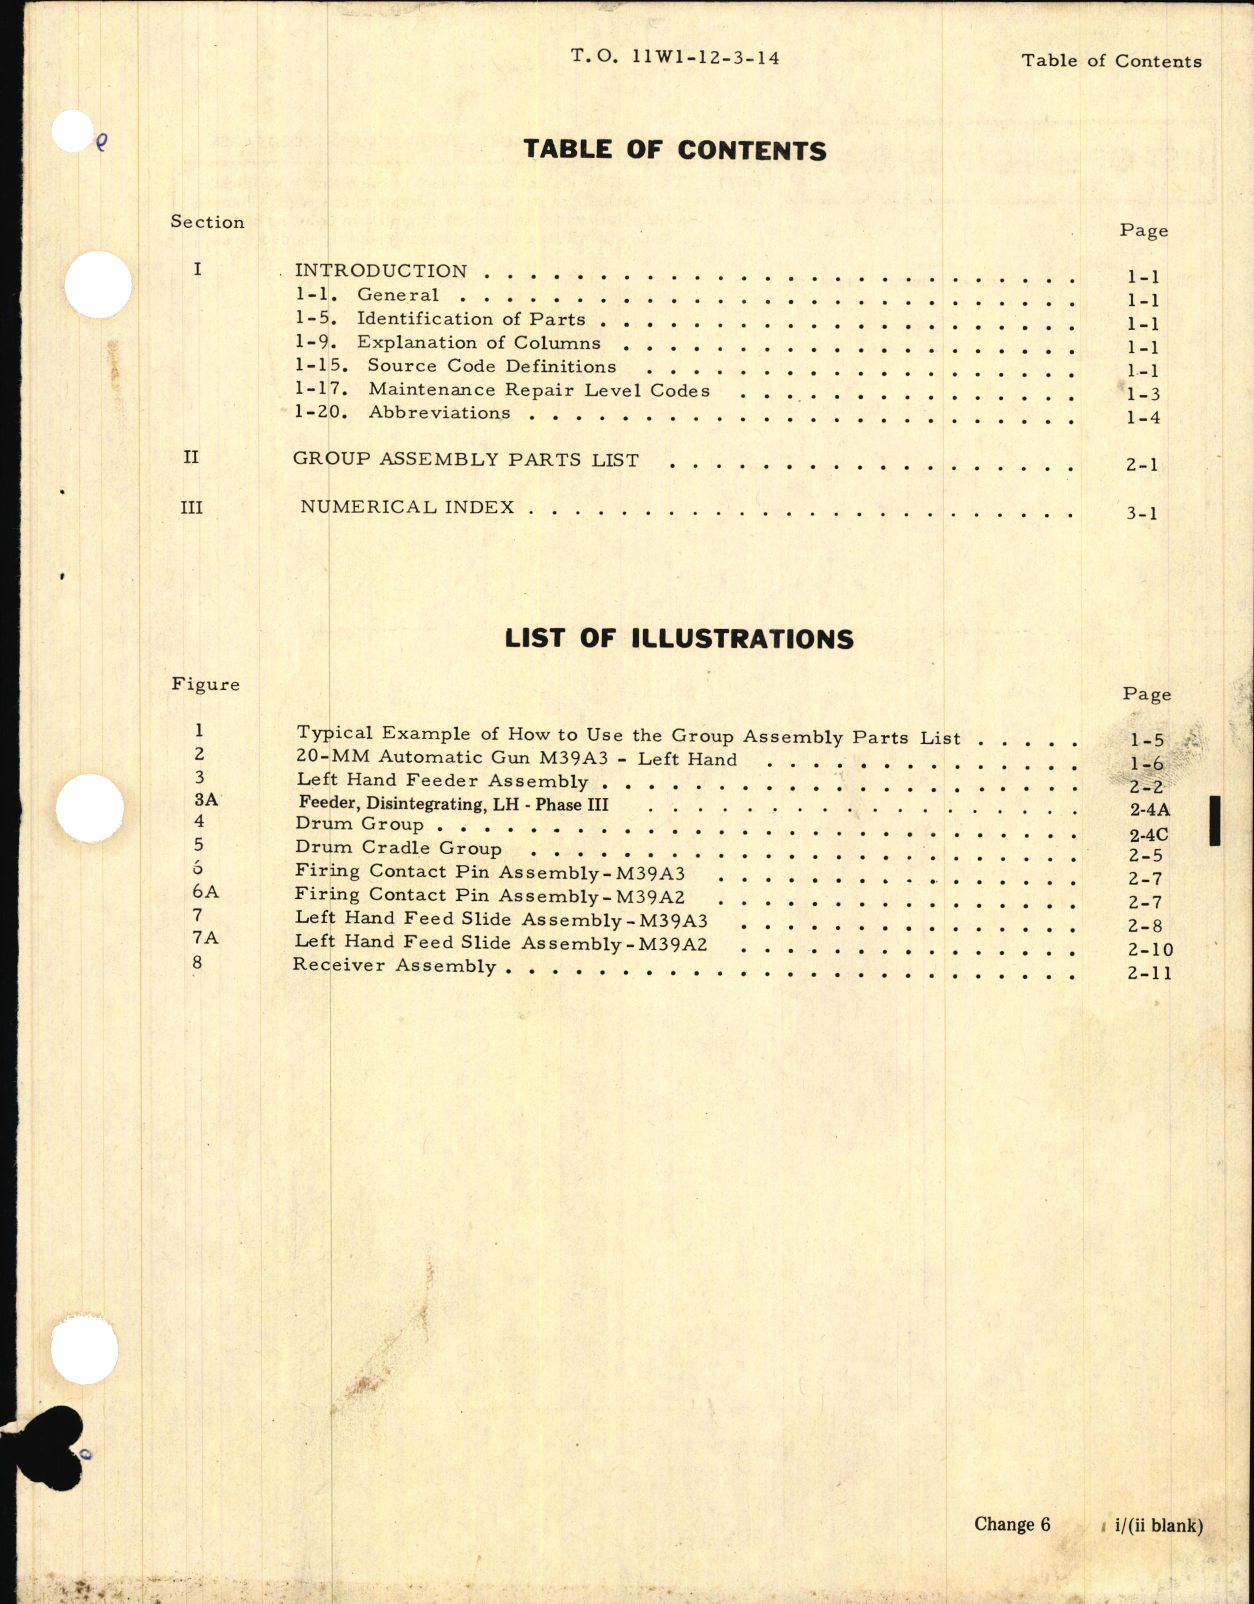 Sample page 5 from AirCorps Library document: Illustrated Parts Breakdown for 20-MM Automatic Guns M39A3 and M39A2